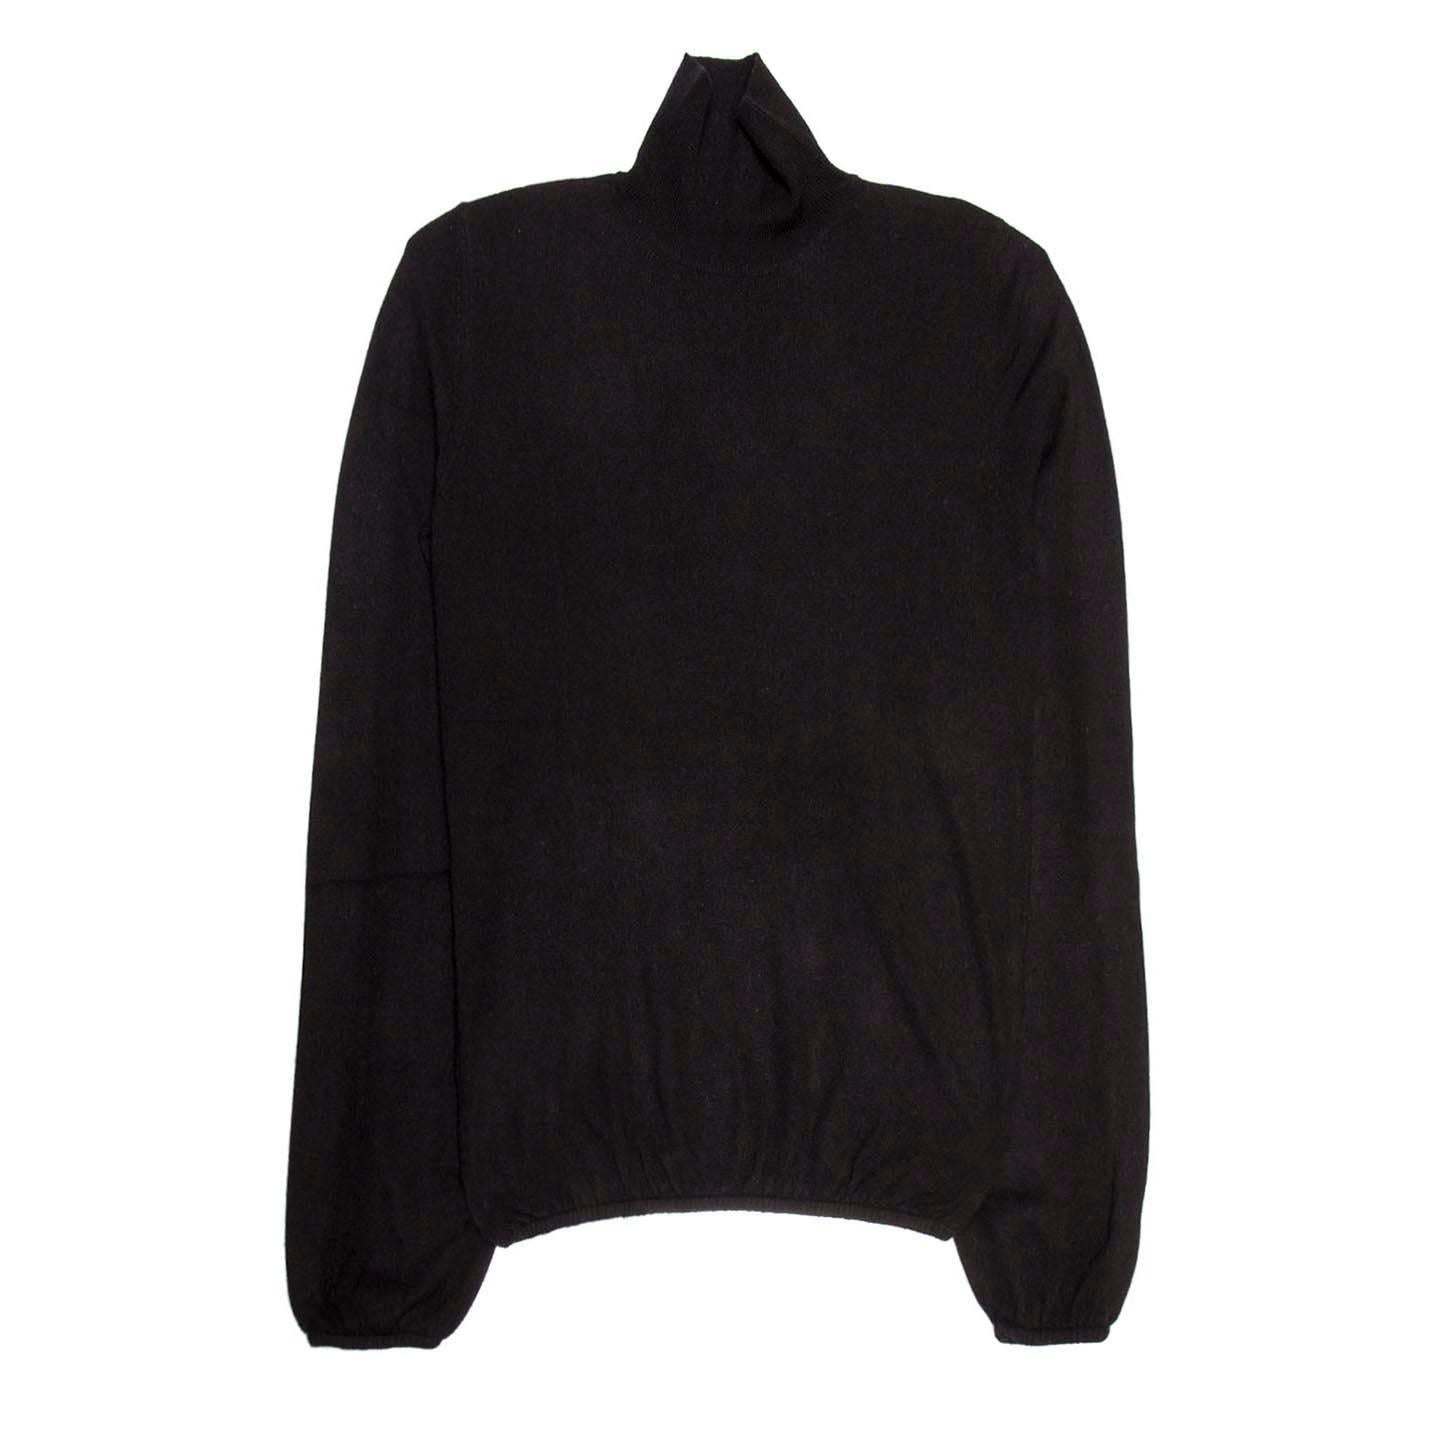 Black cashmere roll neck sweater with elastic gathers at hem and cuffs. Made in France.

Size  M Universal sizing 

Condition  Excellent: worn once